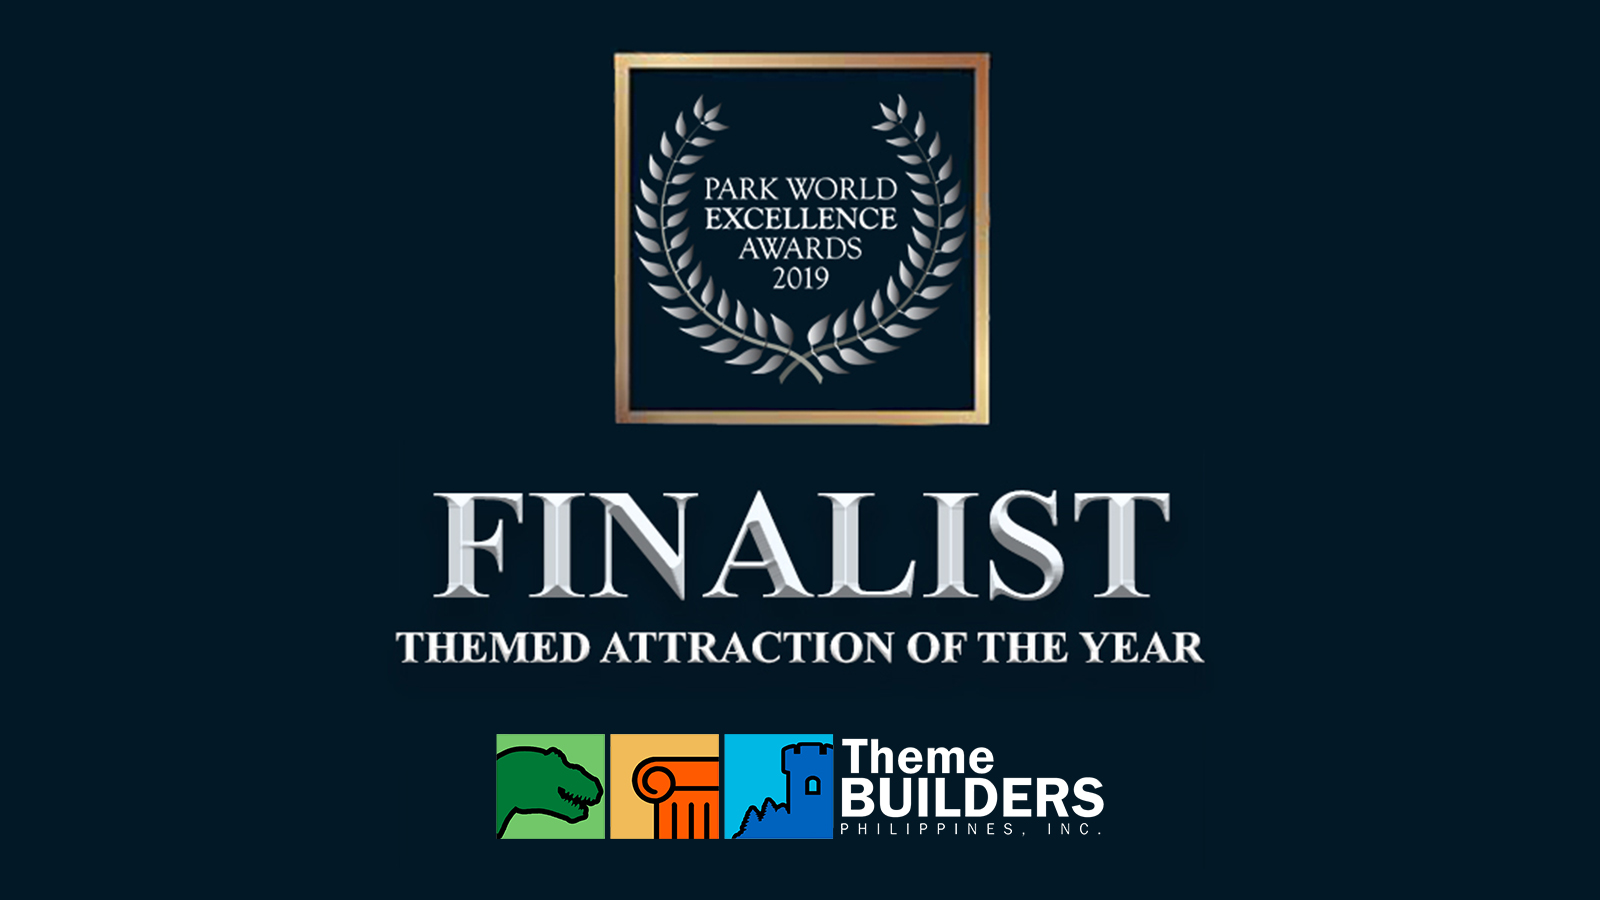 Park World Excellence Awards 2019 Finalist Themebuilders Philippines